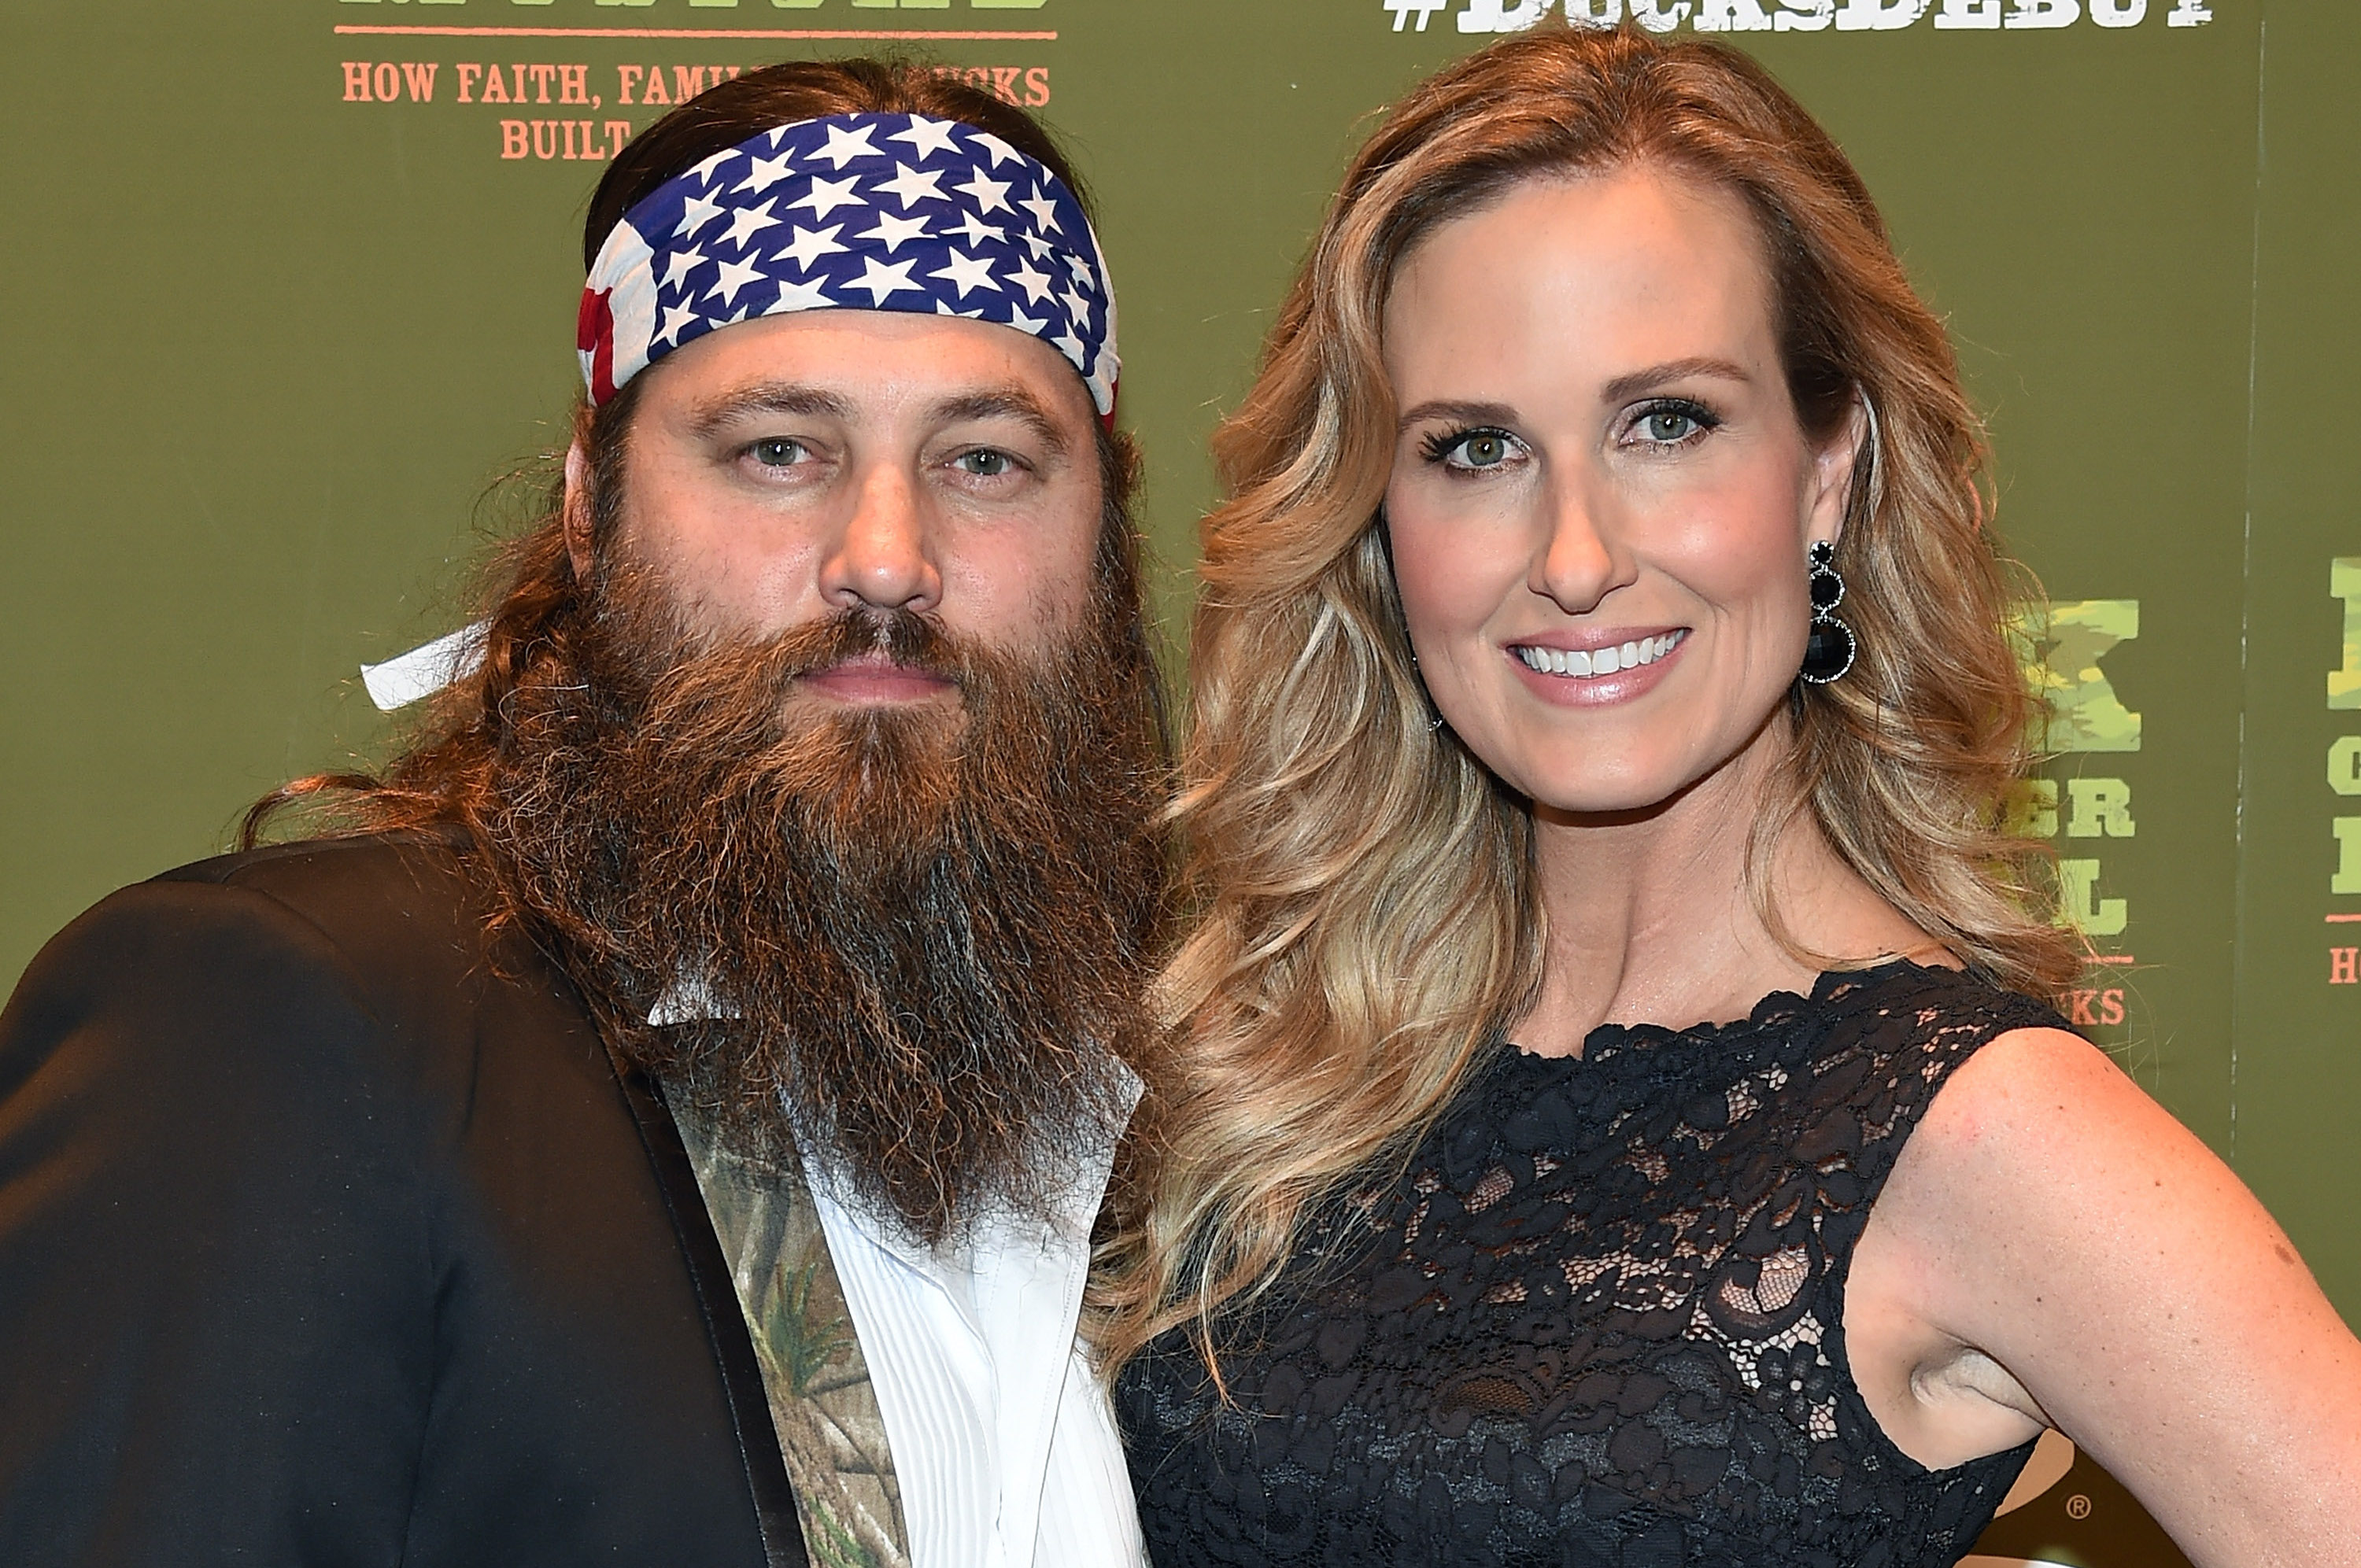 Duck Dynasty Stars Go on Good Morning America and Talk Trump pic